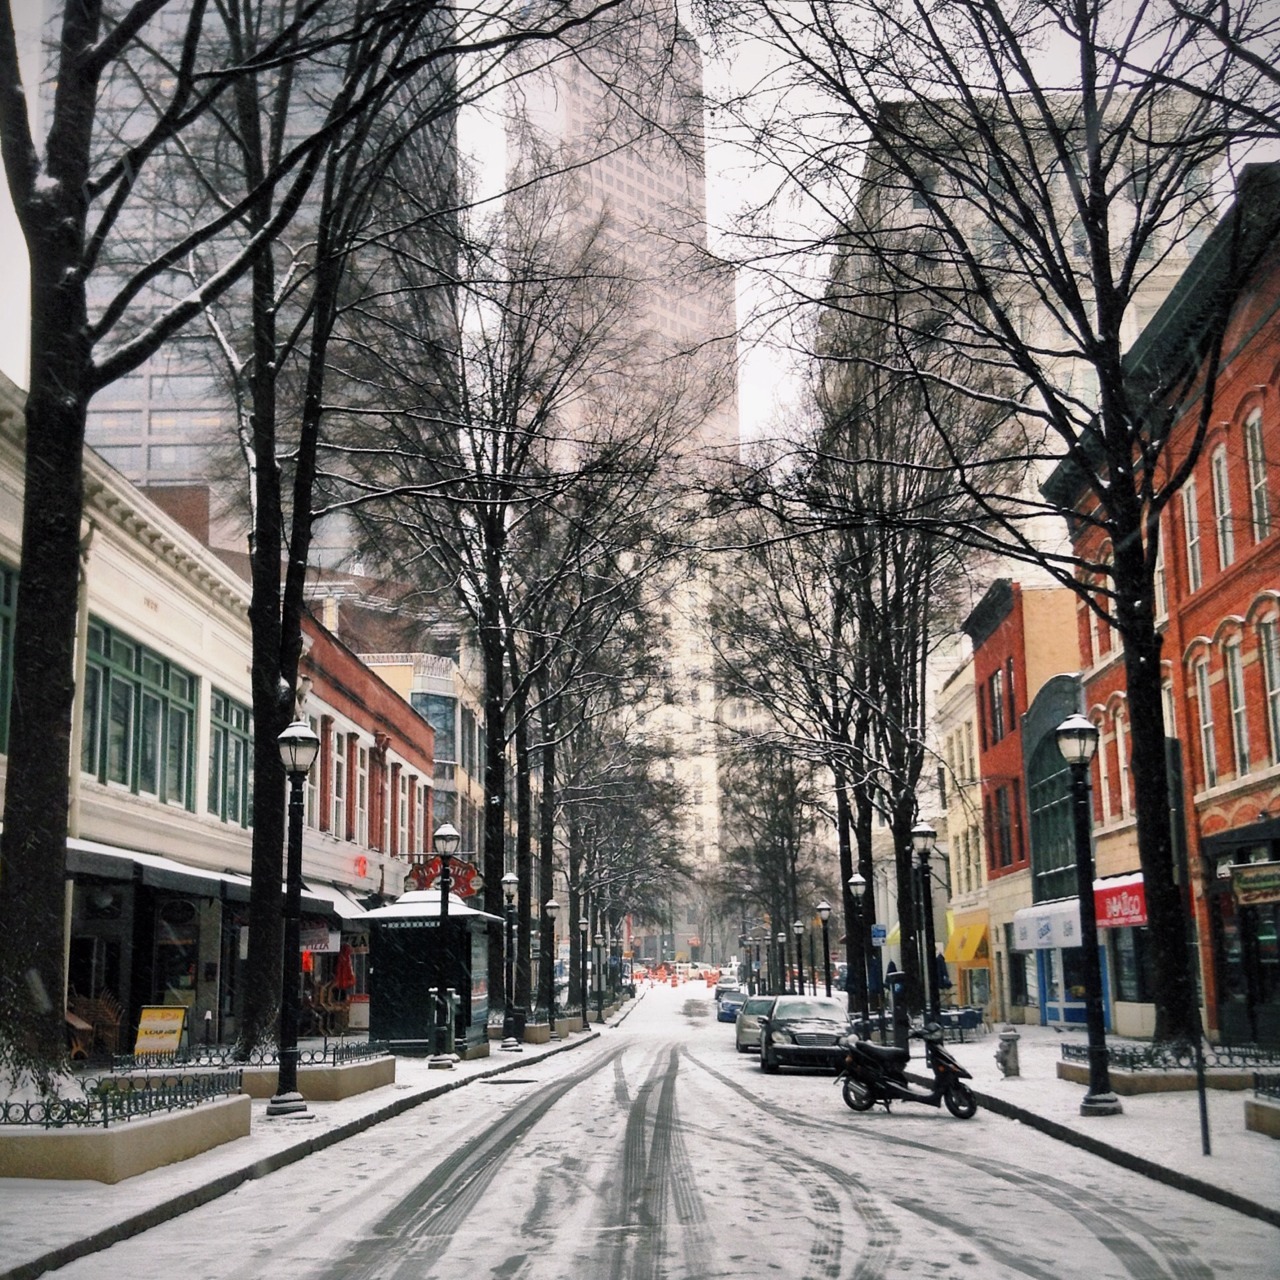 atlurbanist:

Downtown Atlanta as a winter wonderland. This is the snowfall today on Broad Street. Nearby, GSU students are having fun making snowmen and having snowball fights in the park.